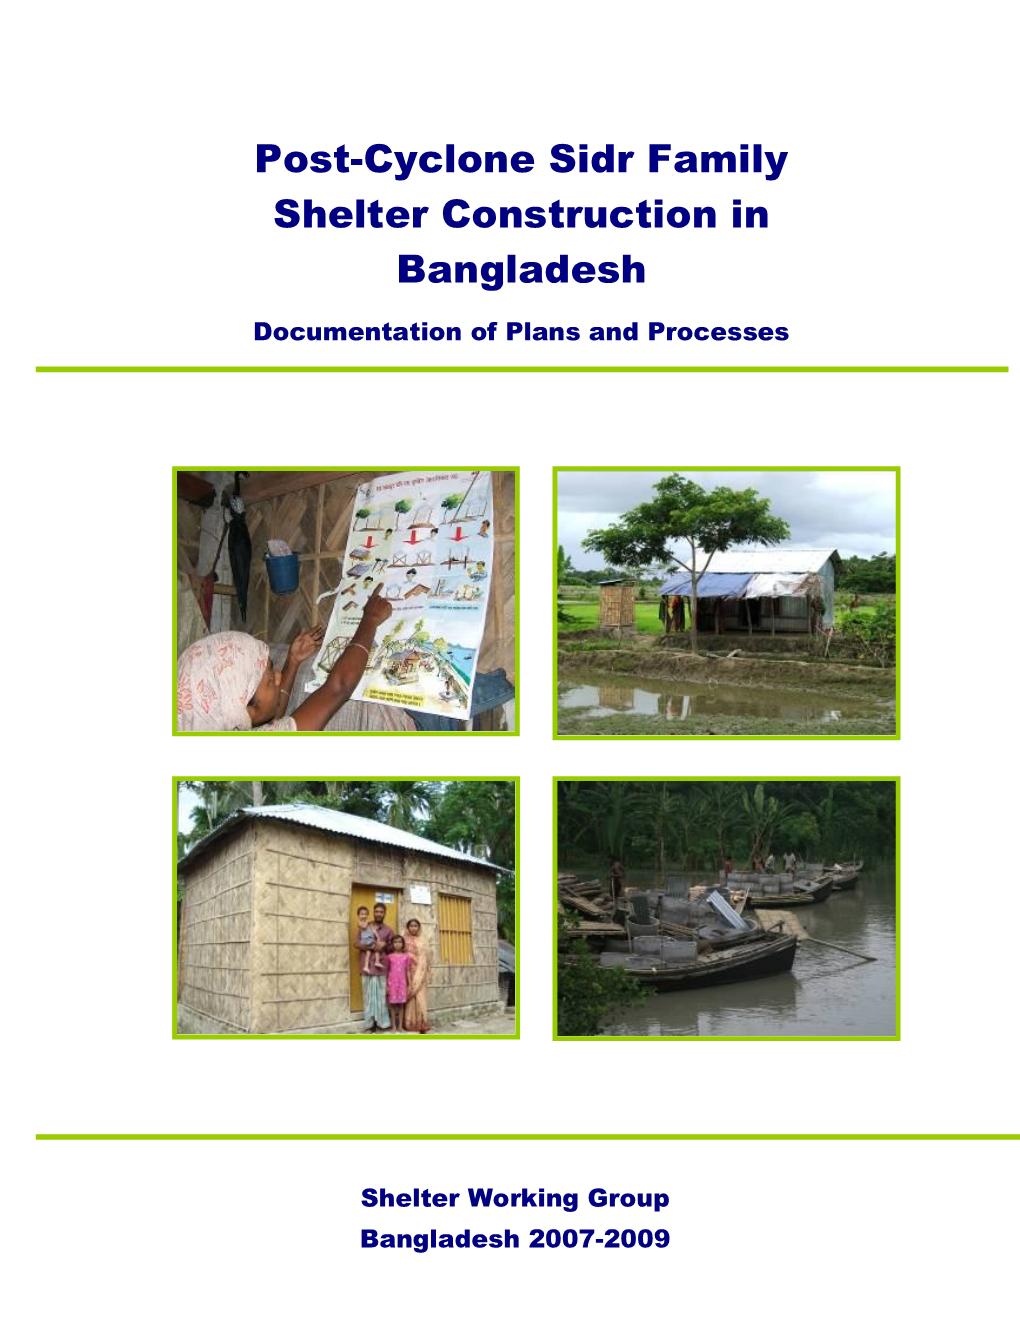 Post-Cyclone Sidr Family Shelter Construction in Bangladesh